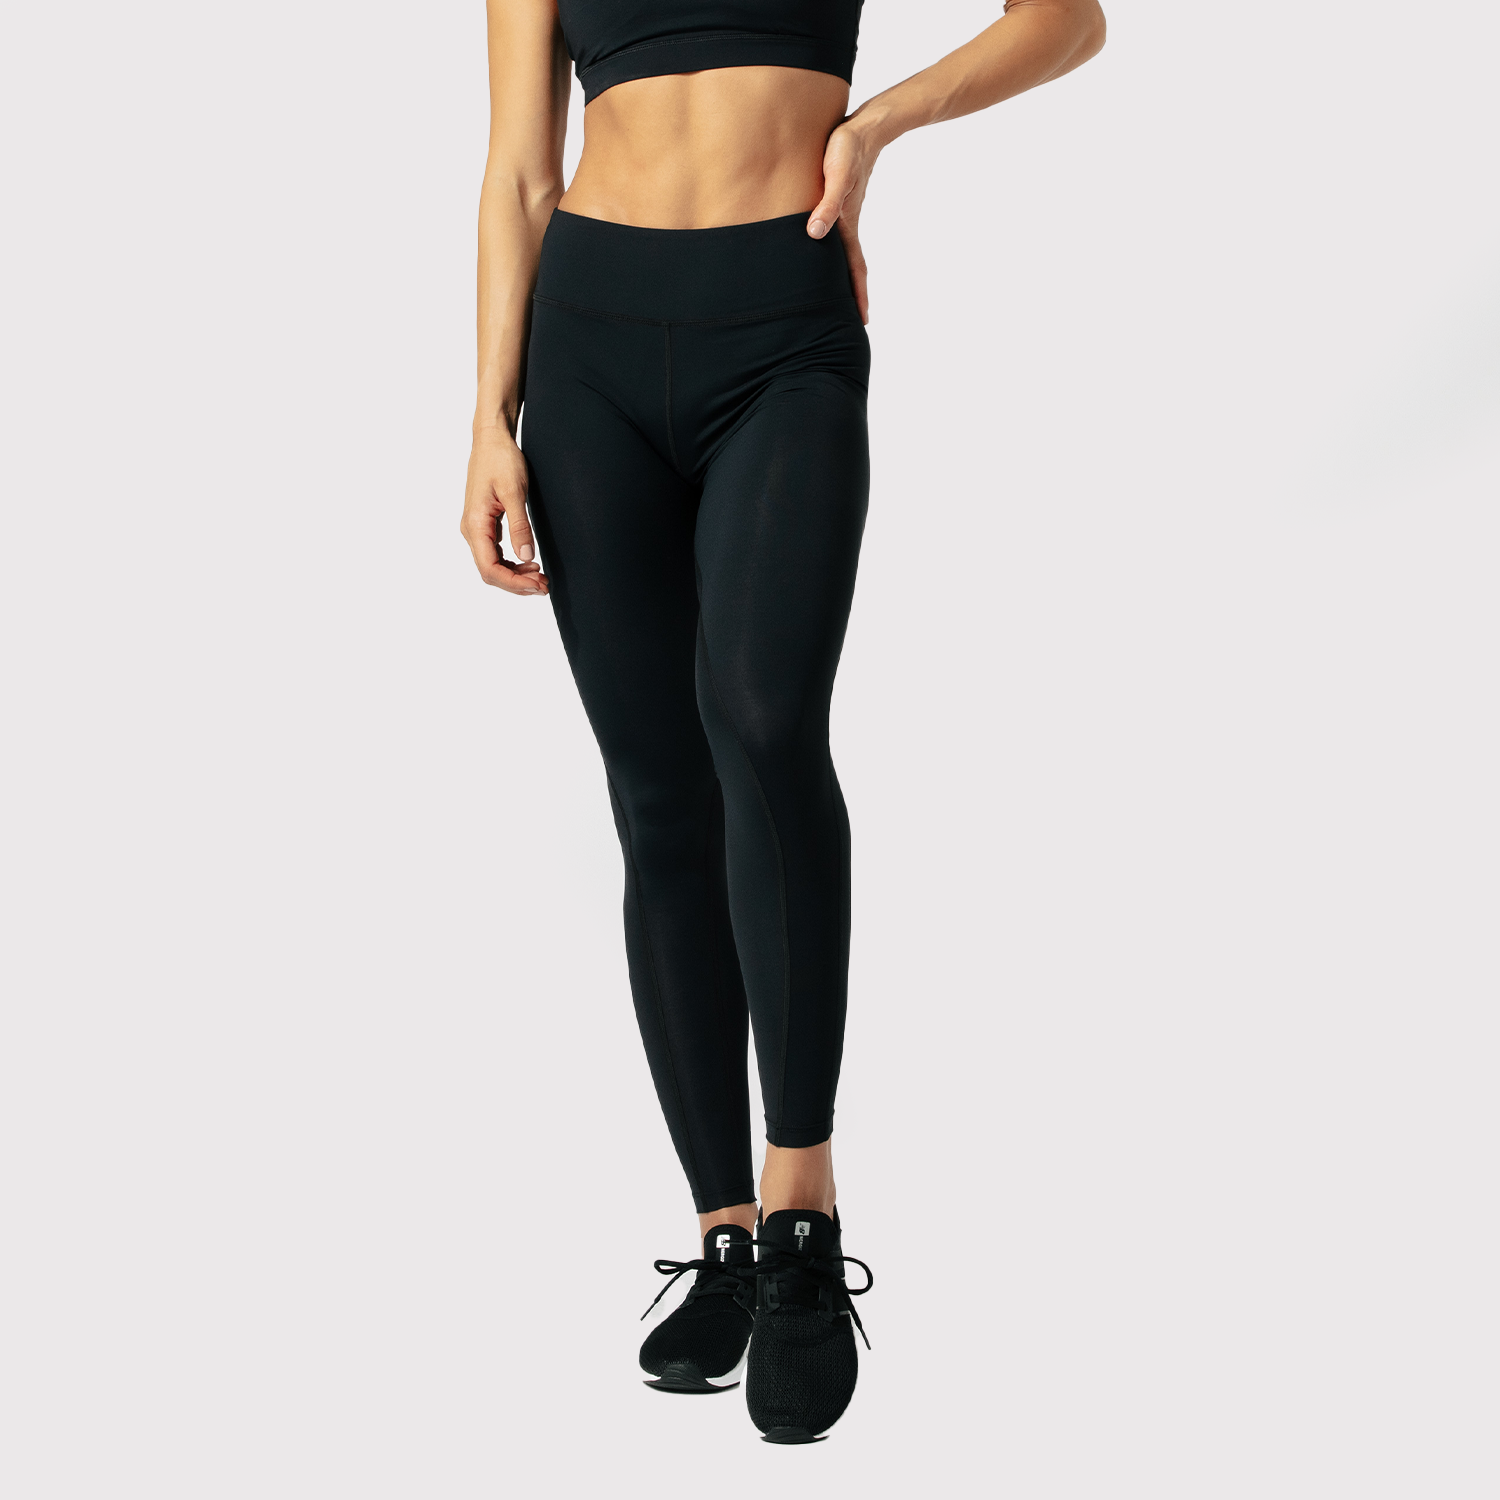 Women's Compression Pants & Tights